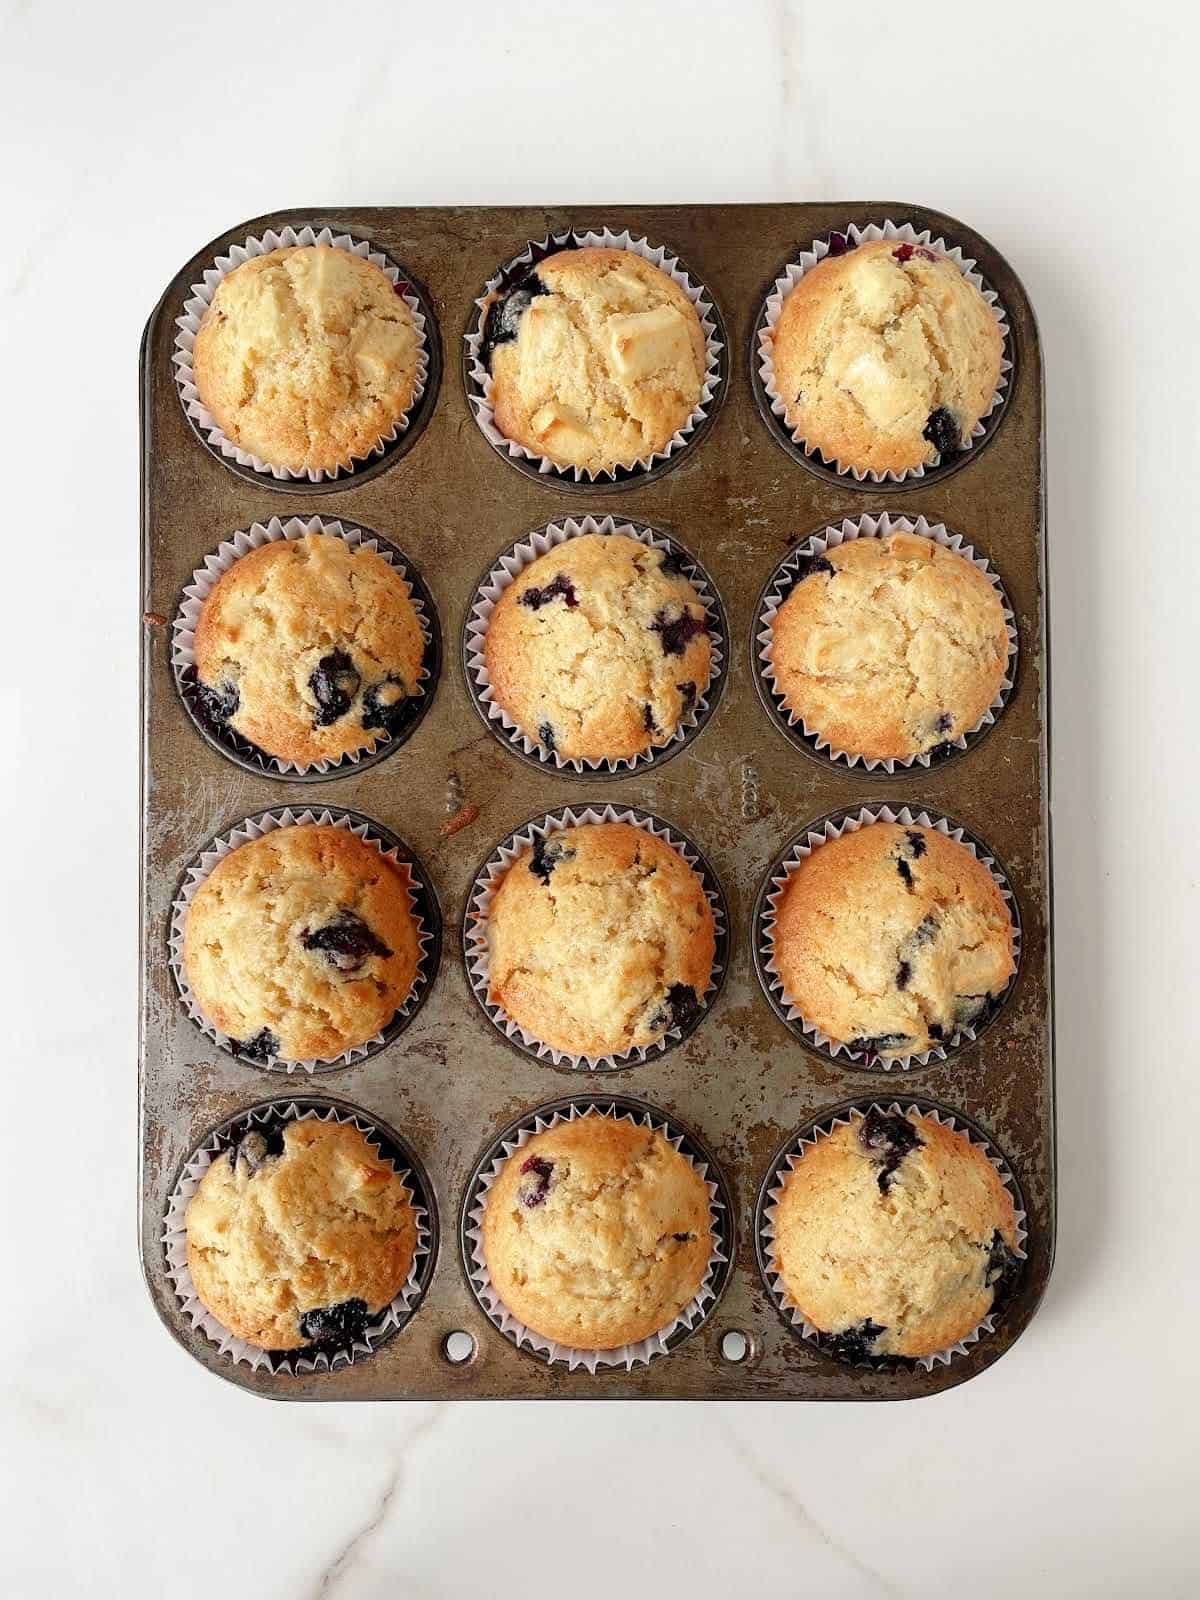 Top view of baked blueberry apple muffins in the metal muffin tin on a white marble surface.